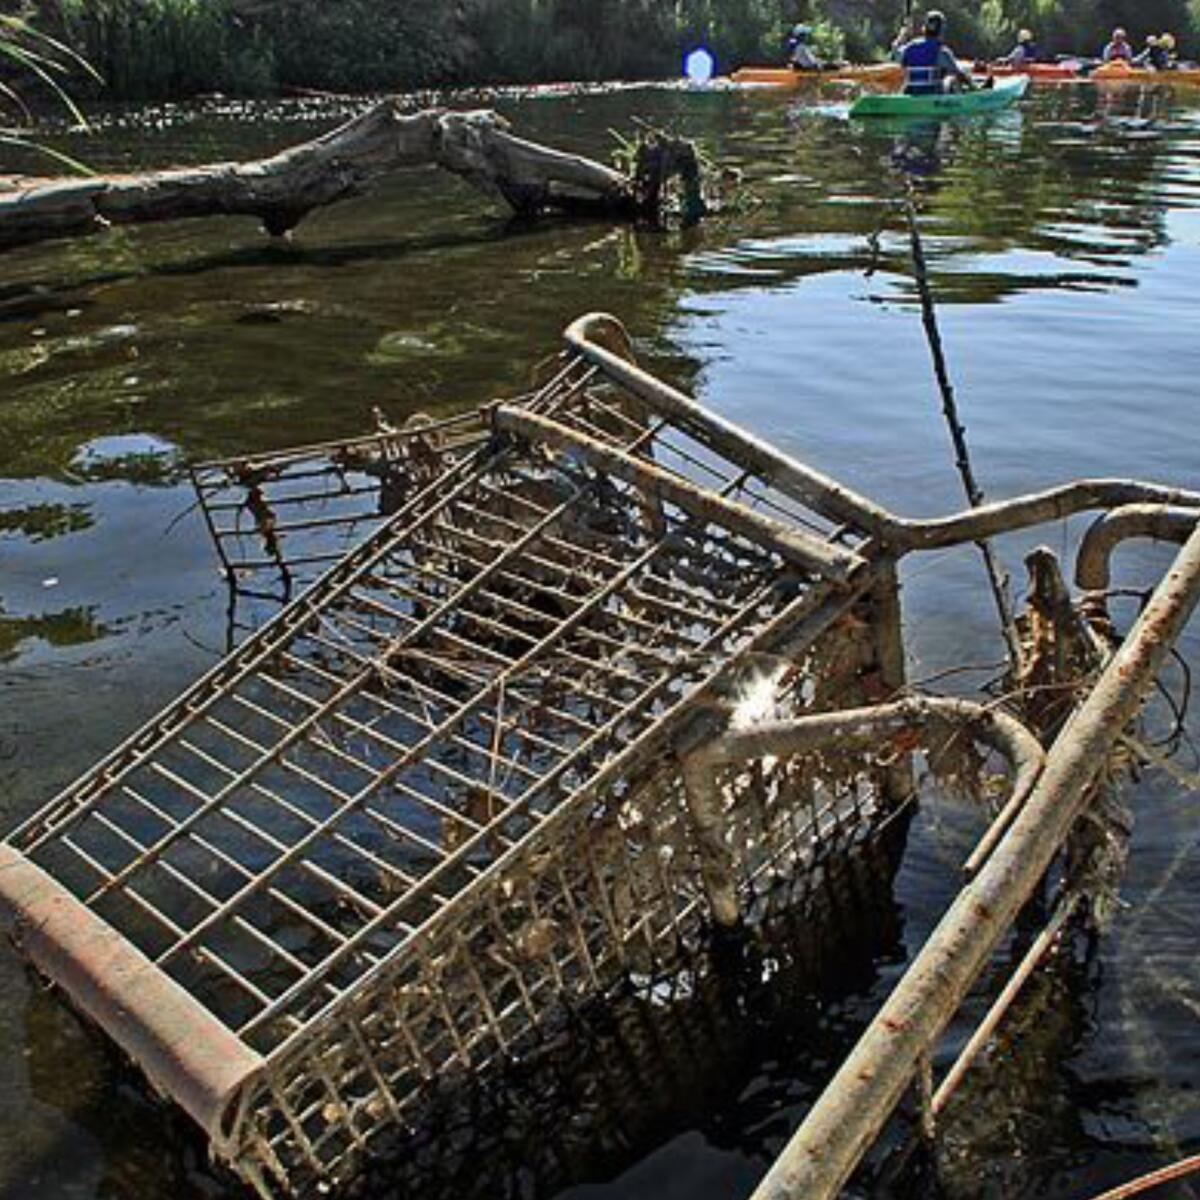 Closeup of a rusted grocery cart partially submerged in water as people kayak in the background.